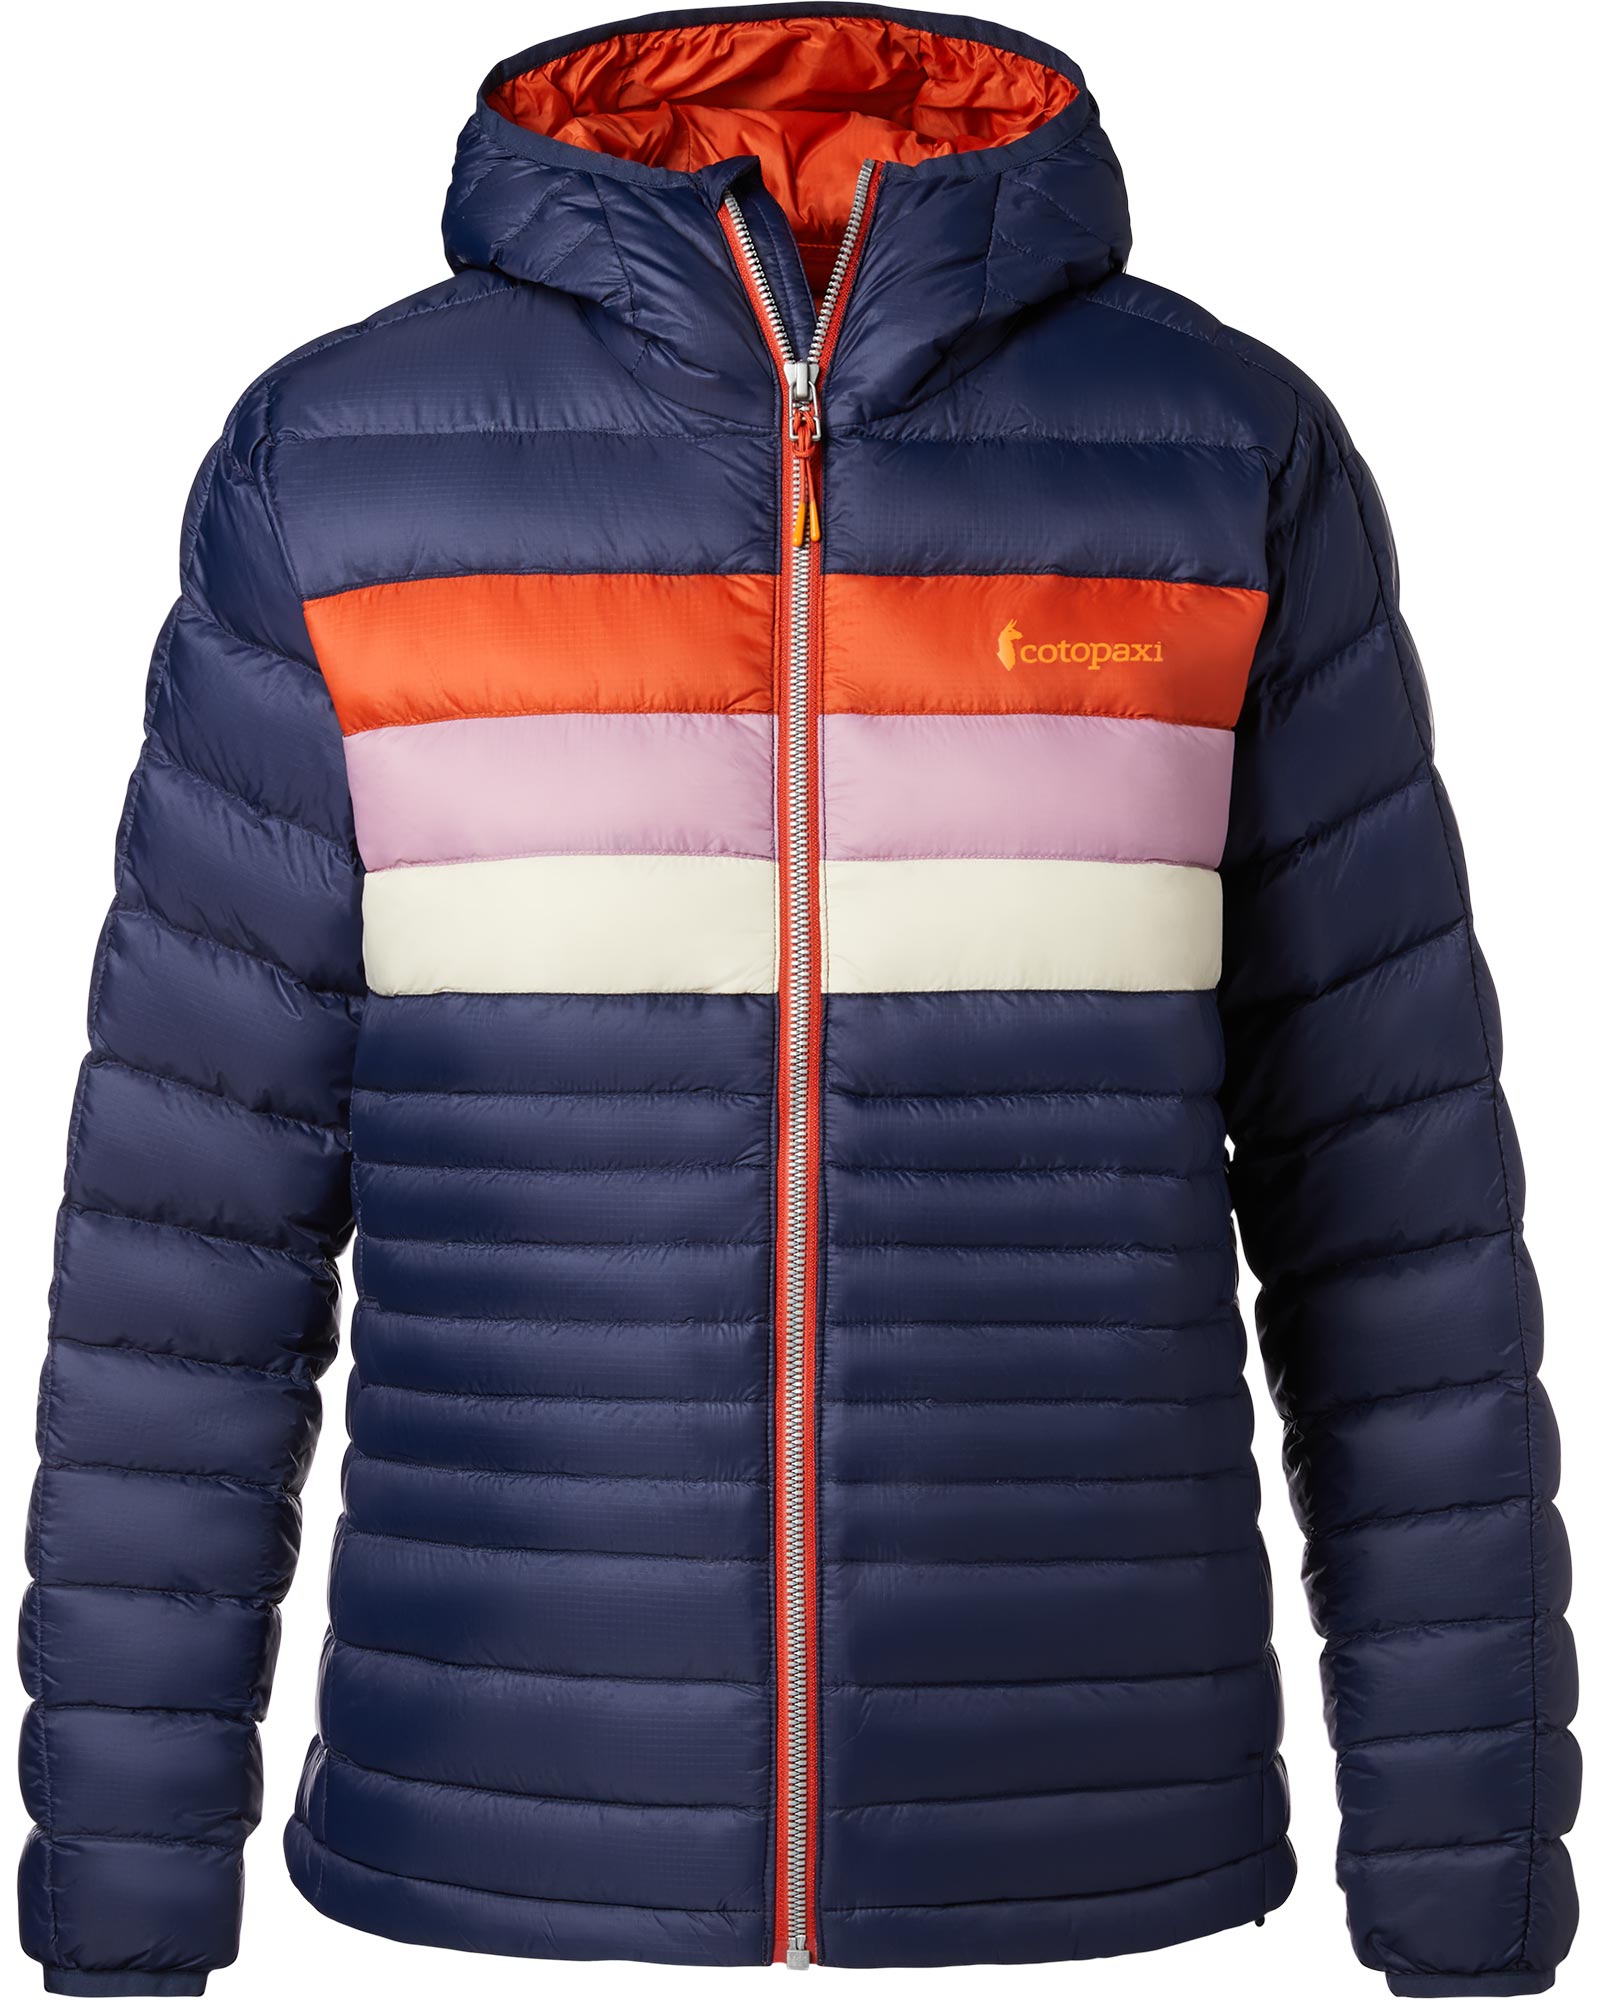 Product image of Cotopaxi Fuego Women's Hooded Down Jacket